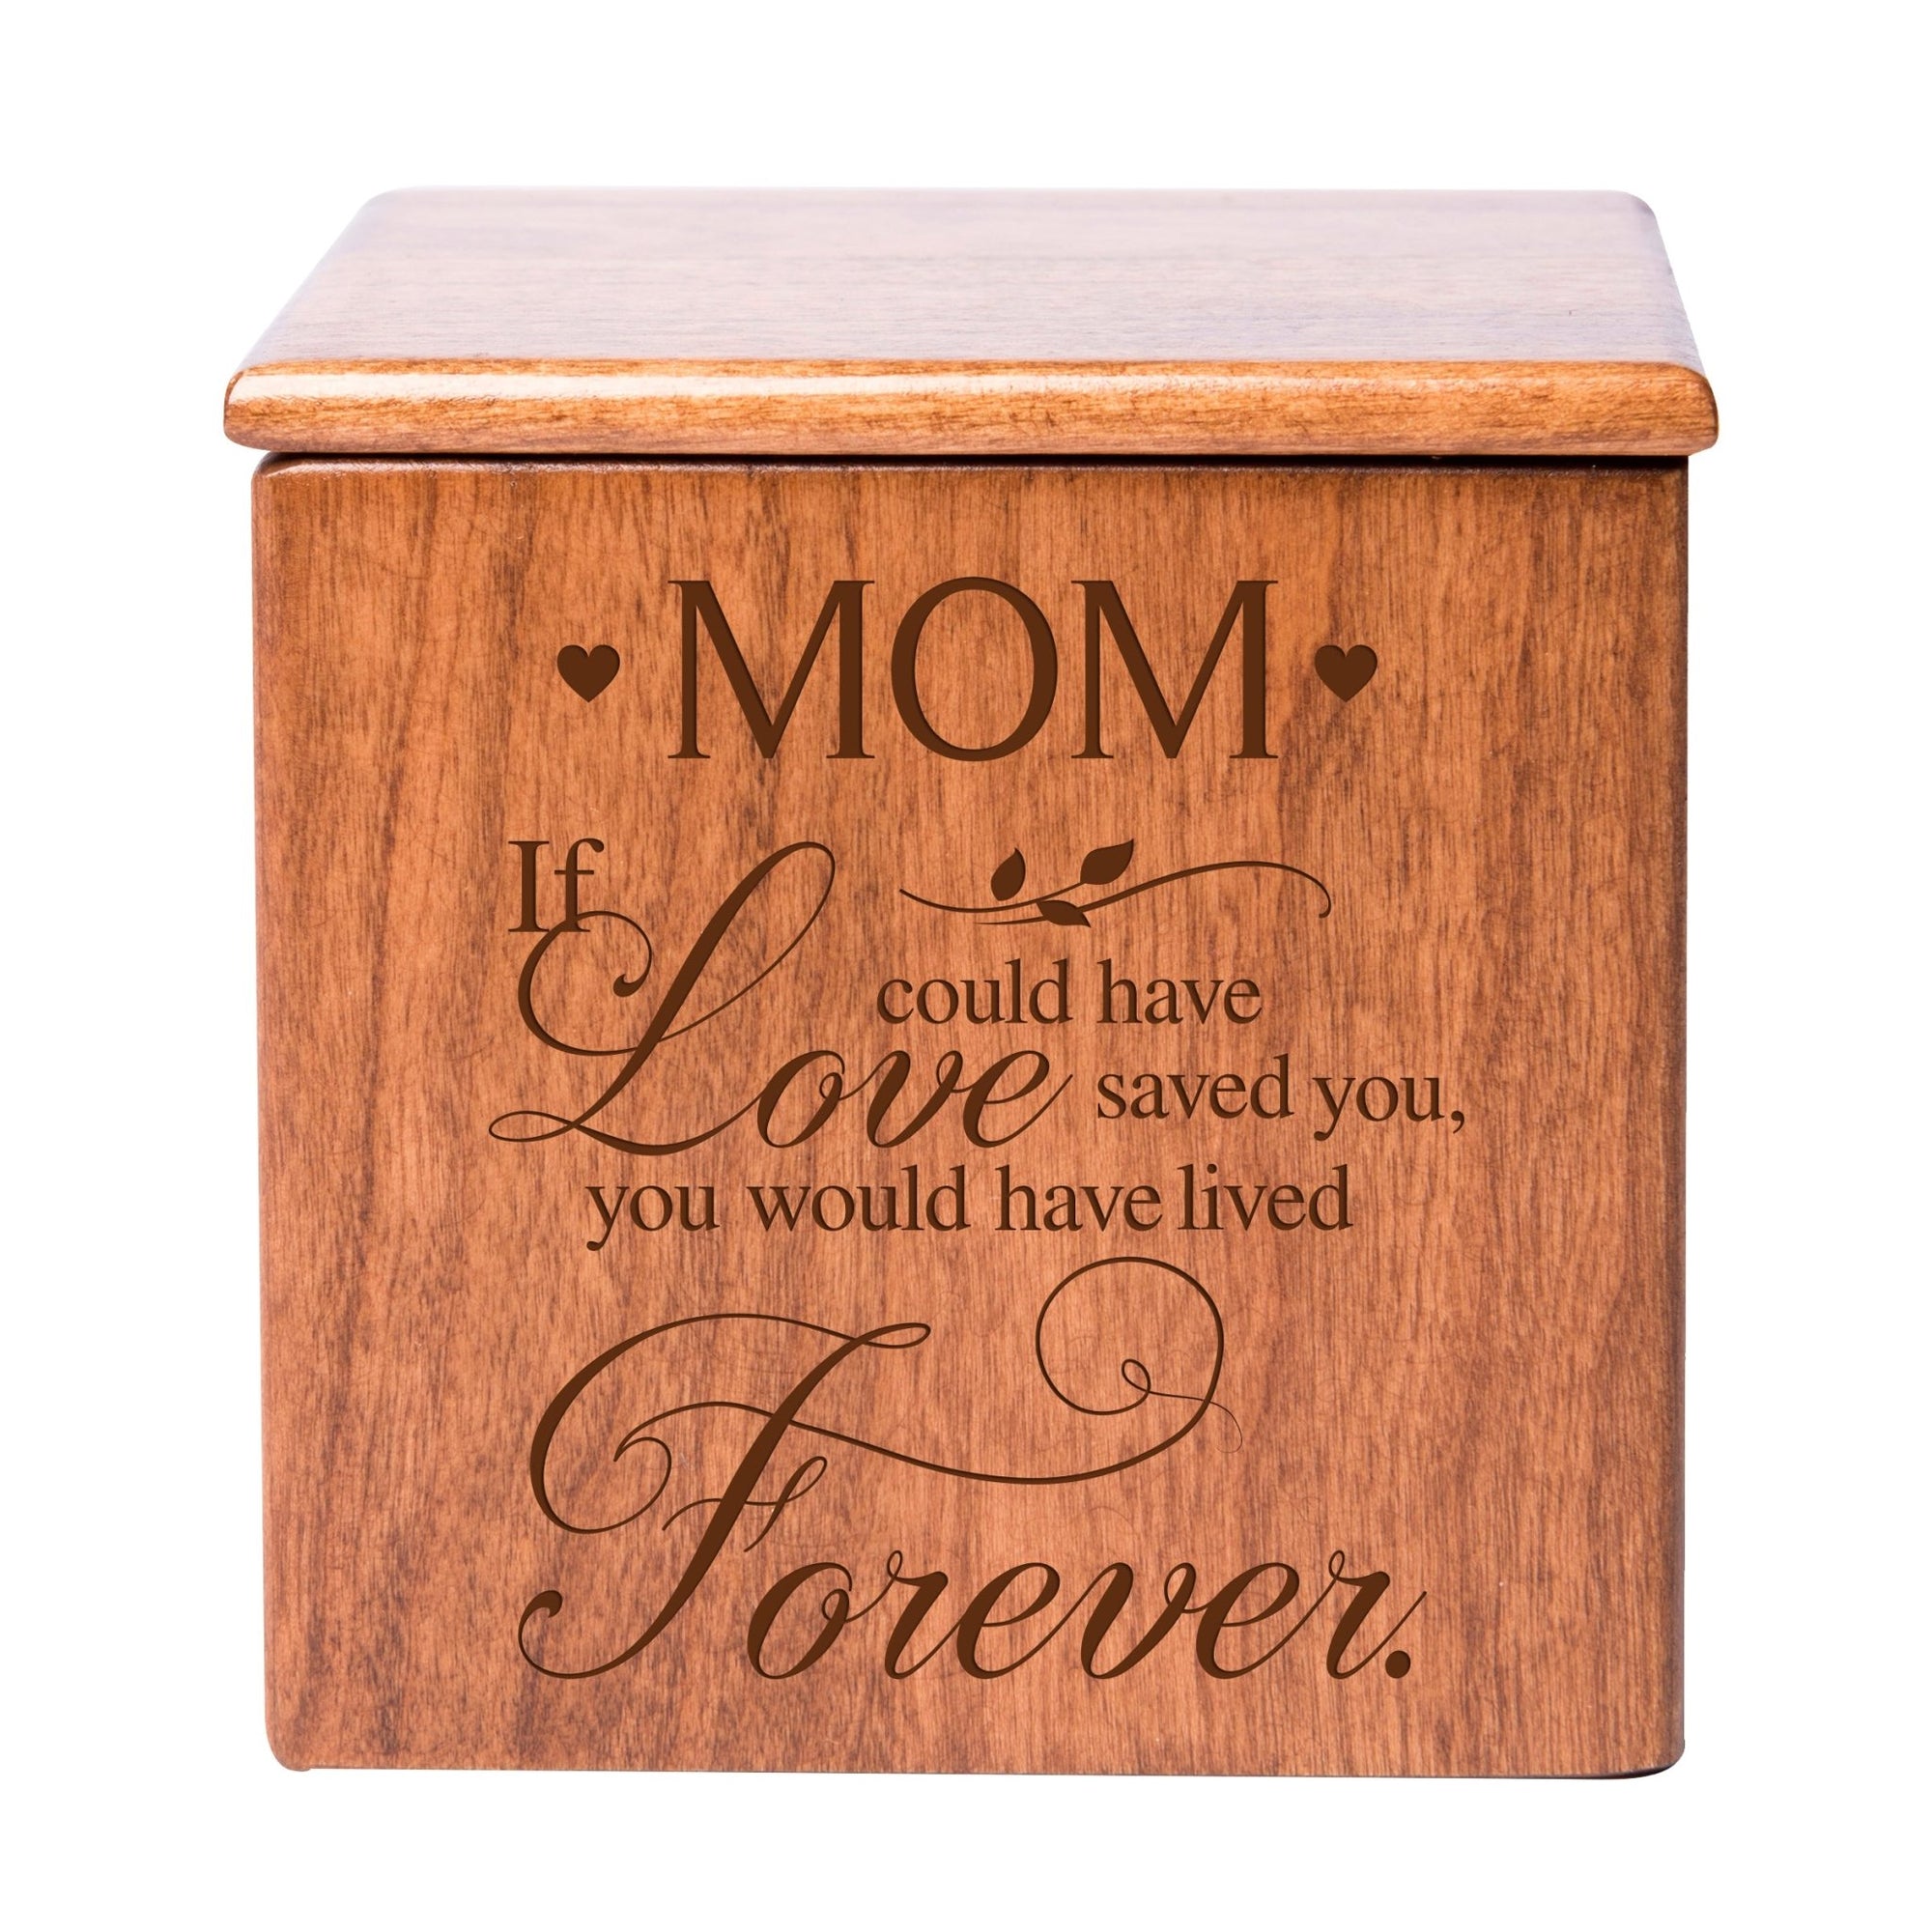 Modern Inspirational Memorial Wooden Cremation Urn Box 4.5x4.5in Holds 49 Cu Inches Of Human Ashes (If love could have saved Mom) Funeral and Commemorative Keepsake - LifeSong Milestones